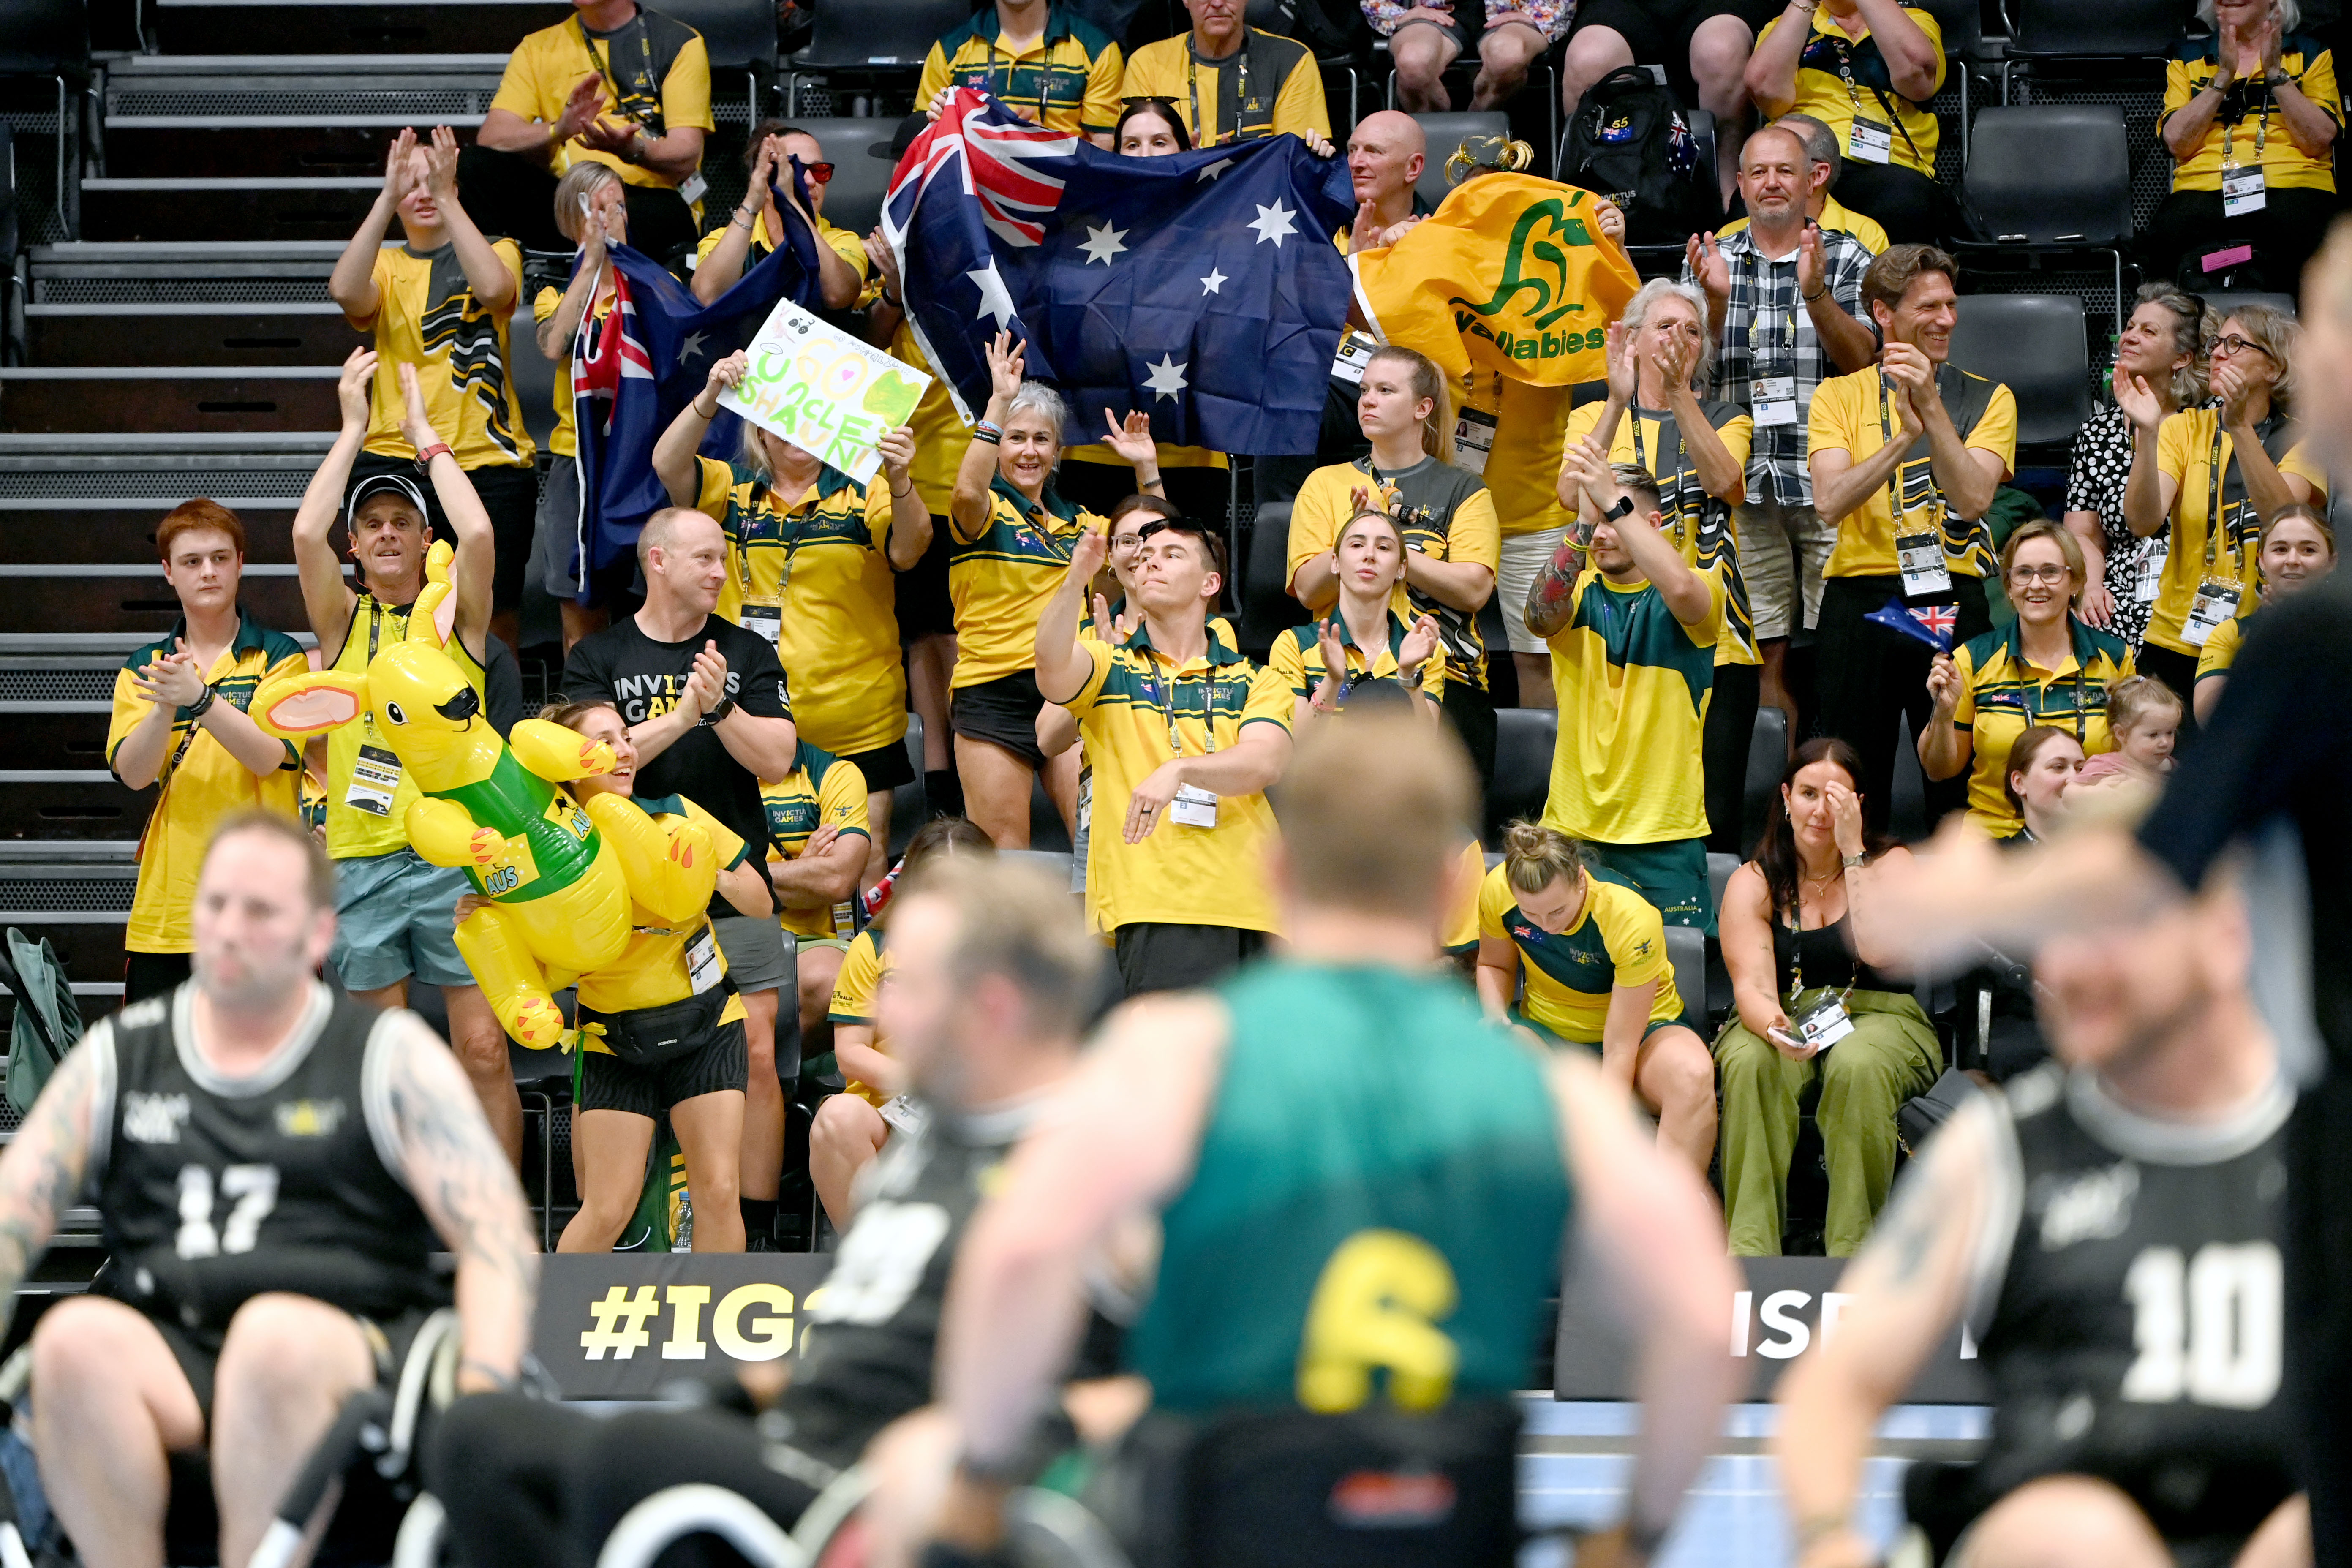 The families and friends support The Wheeling Diggers at Invictus Games Dusseldorf 2023